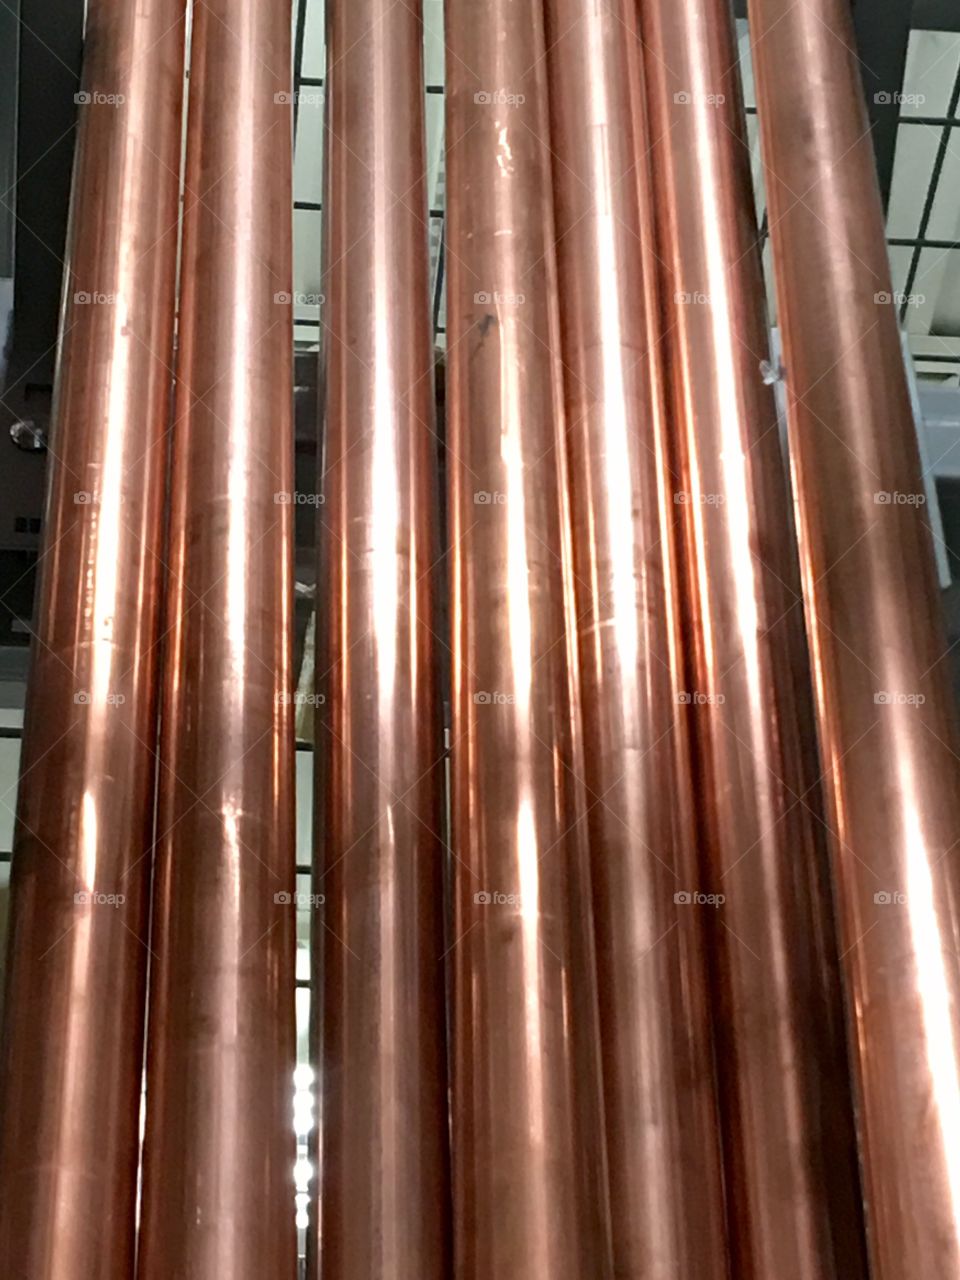 Copper pipes stacked up tall & shiny!